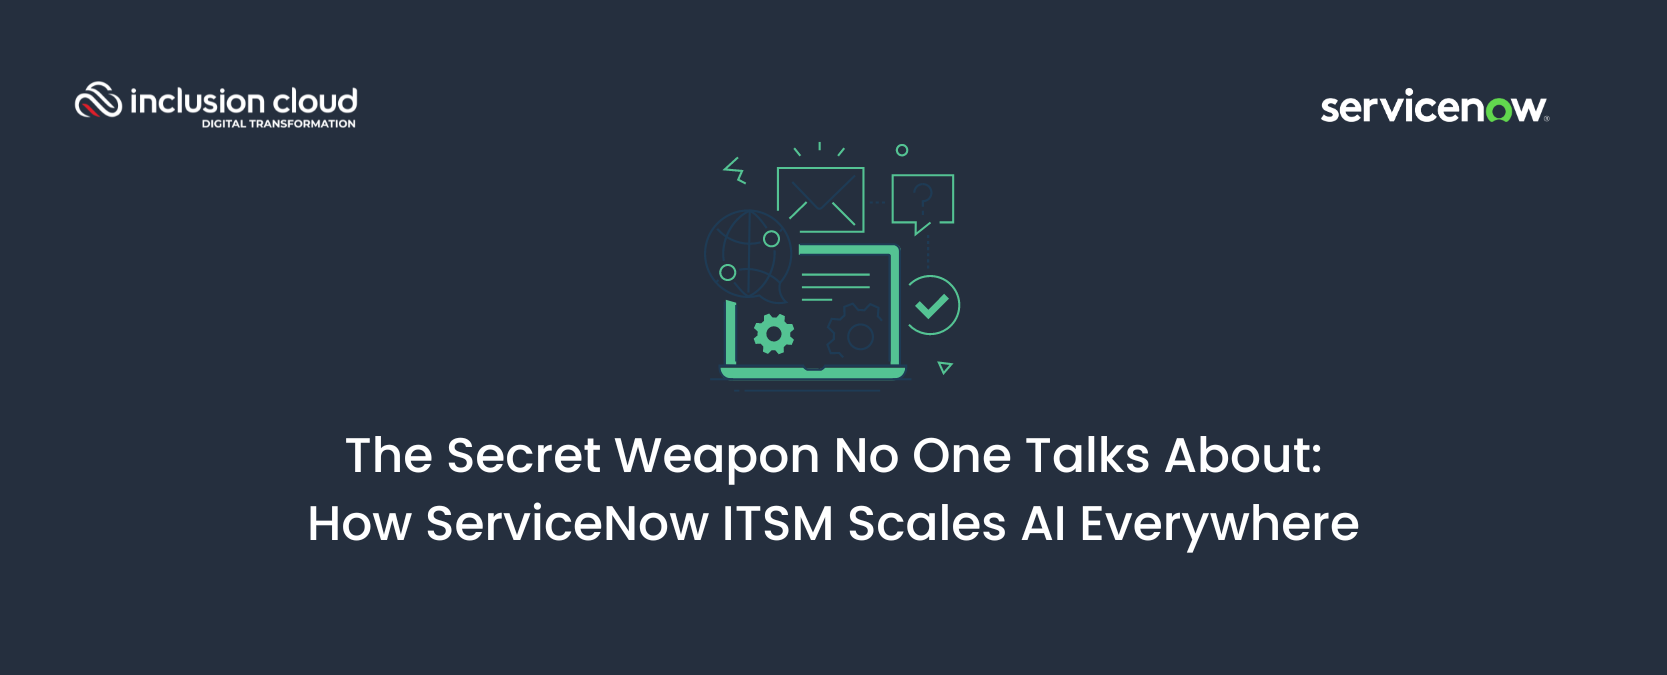 The Secret Weapon No One Talks About How ServiceNow ITSM Scales AI Everywhere